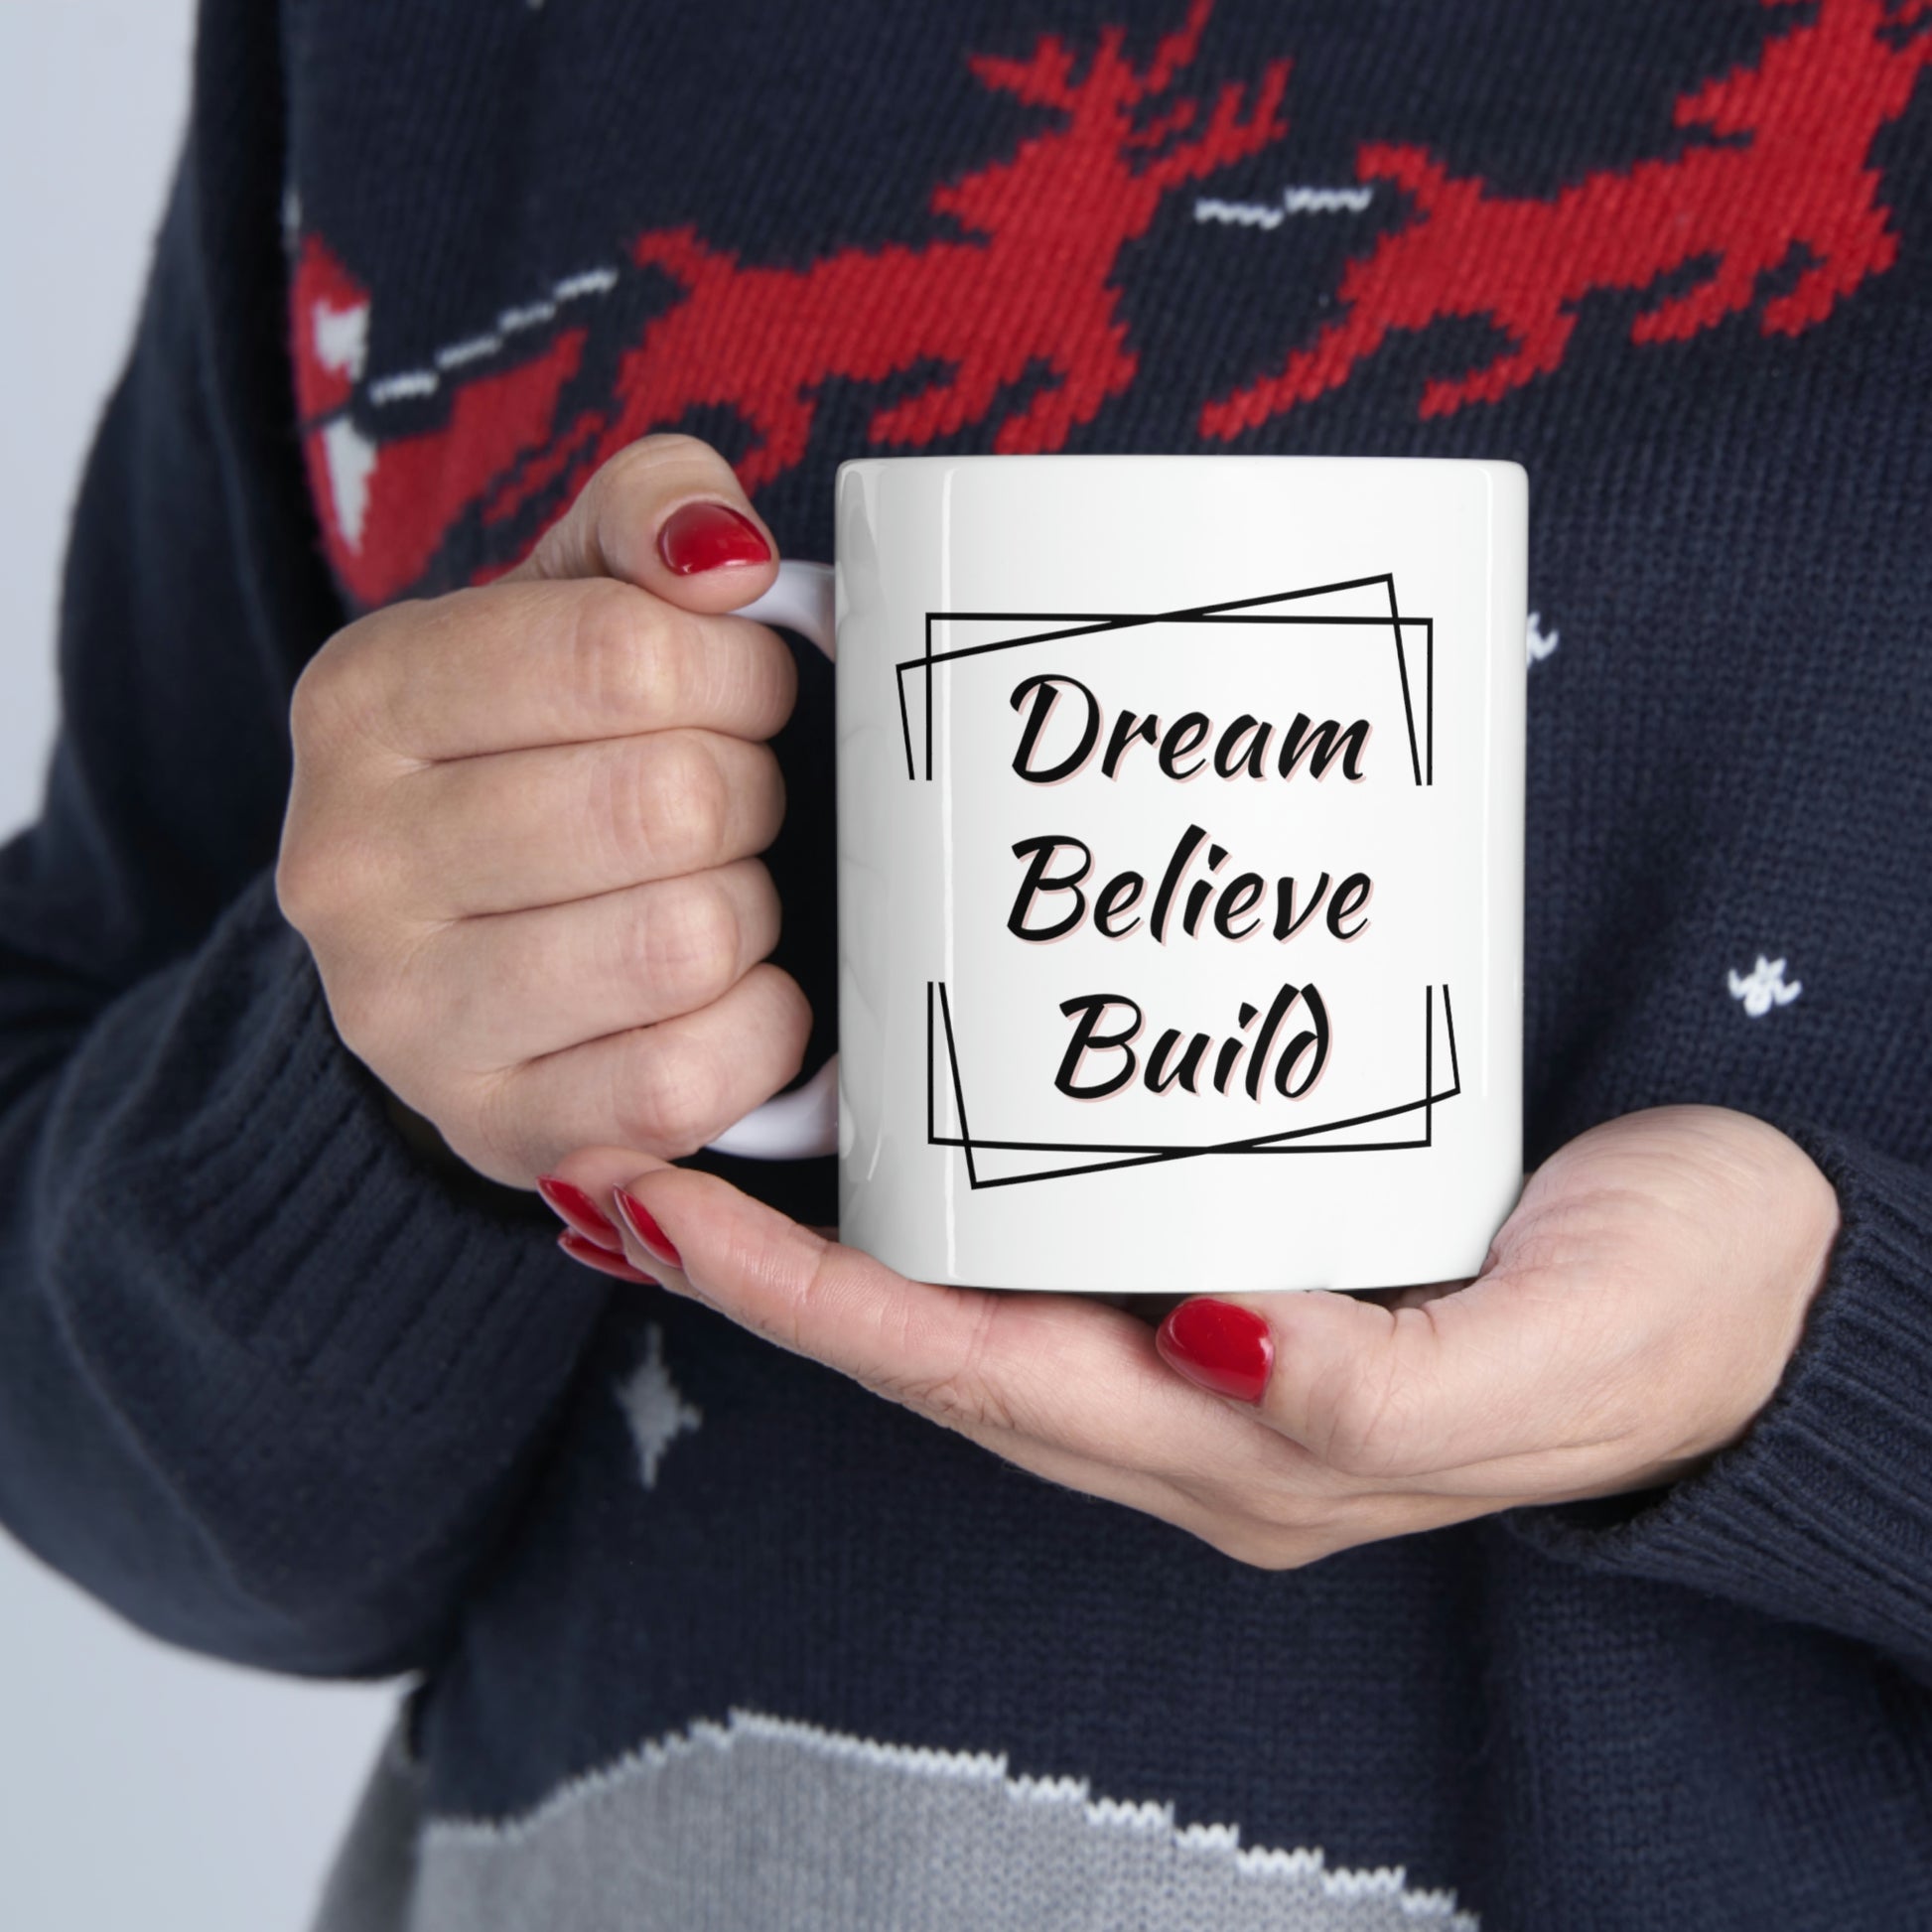 "Dream, Believe, Build" Coffee Cup - Weave Got Gifts - Unique Gifts You Won’t Find Anywhere Else!